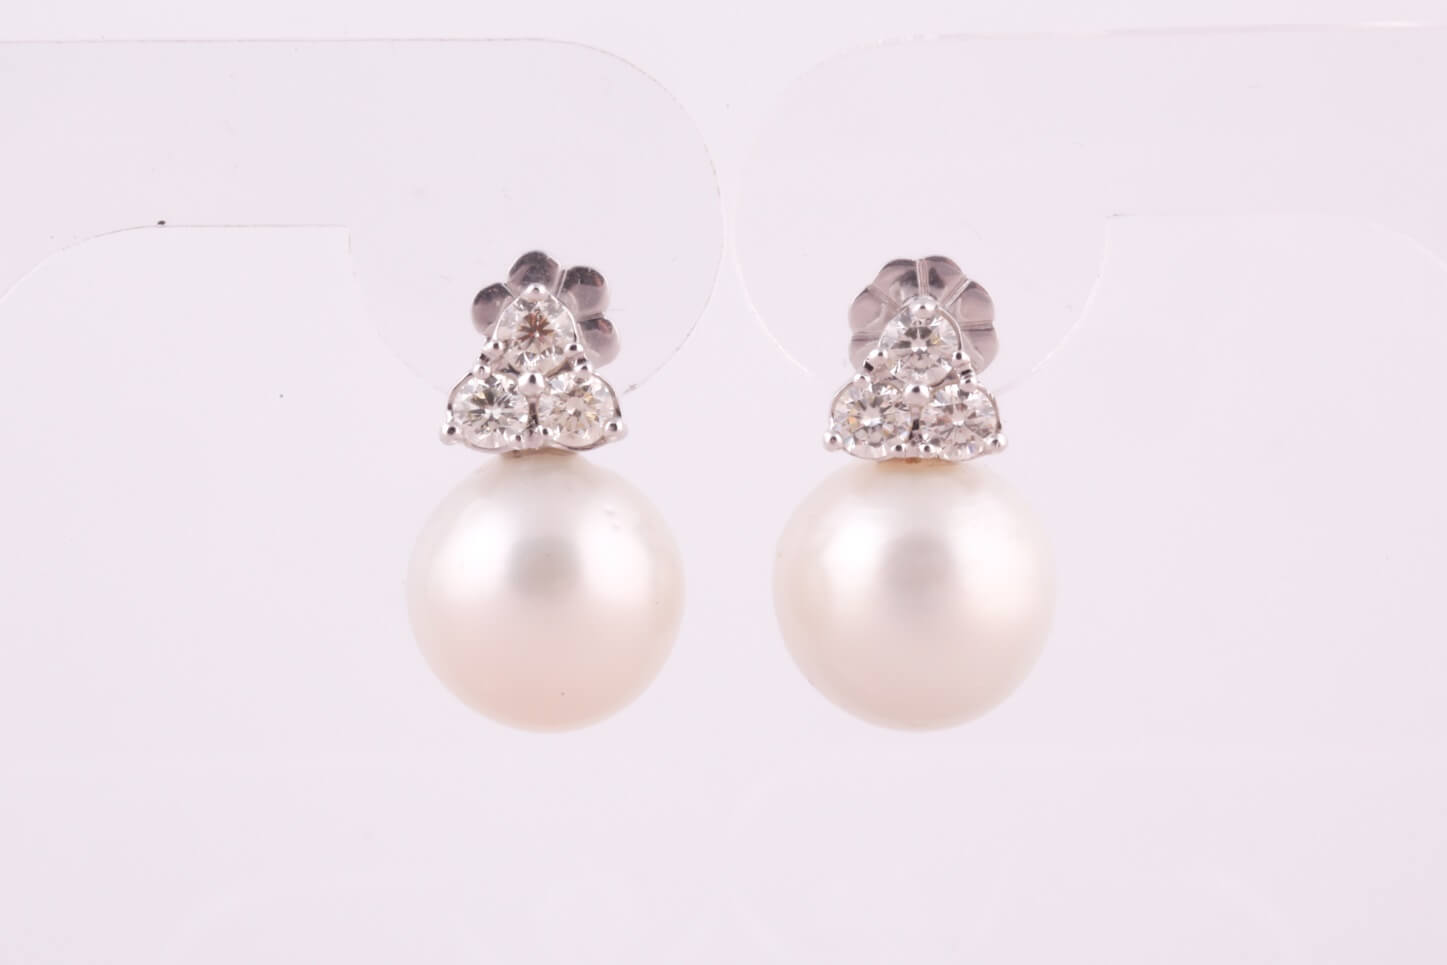 A pair of South Sea pearl and diamond stud earrings